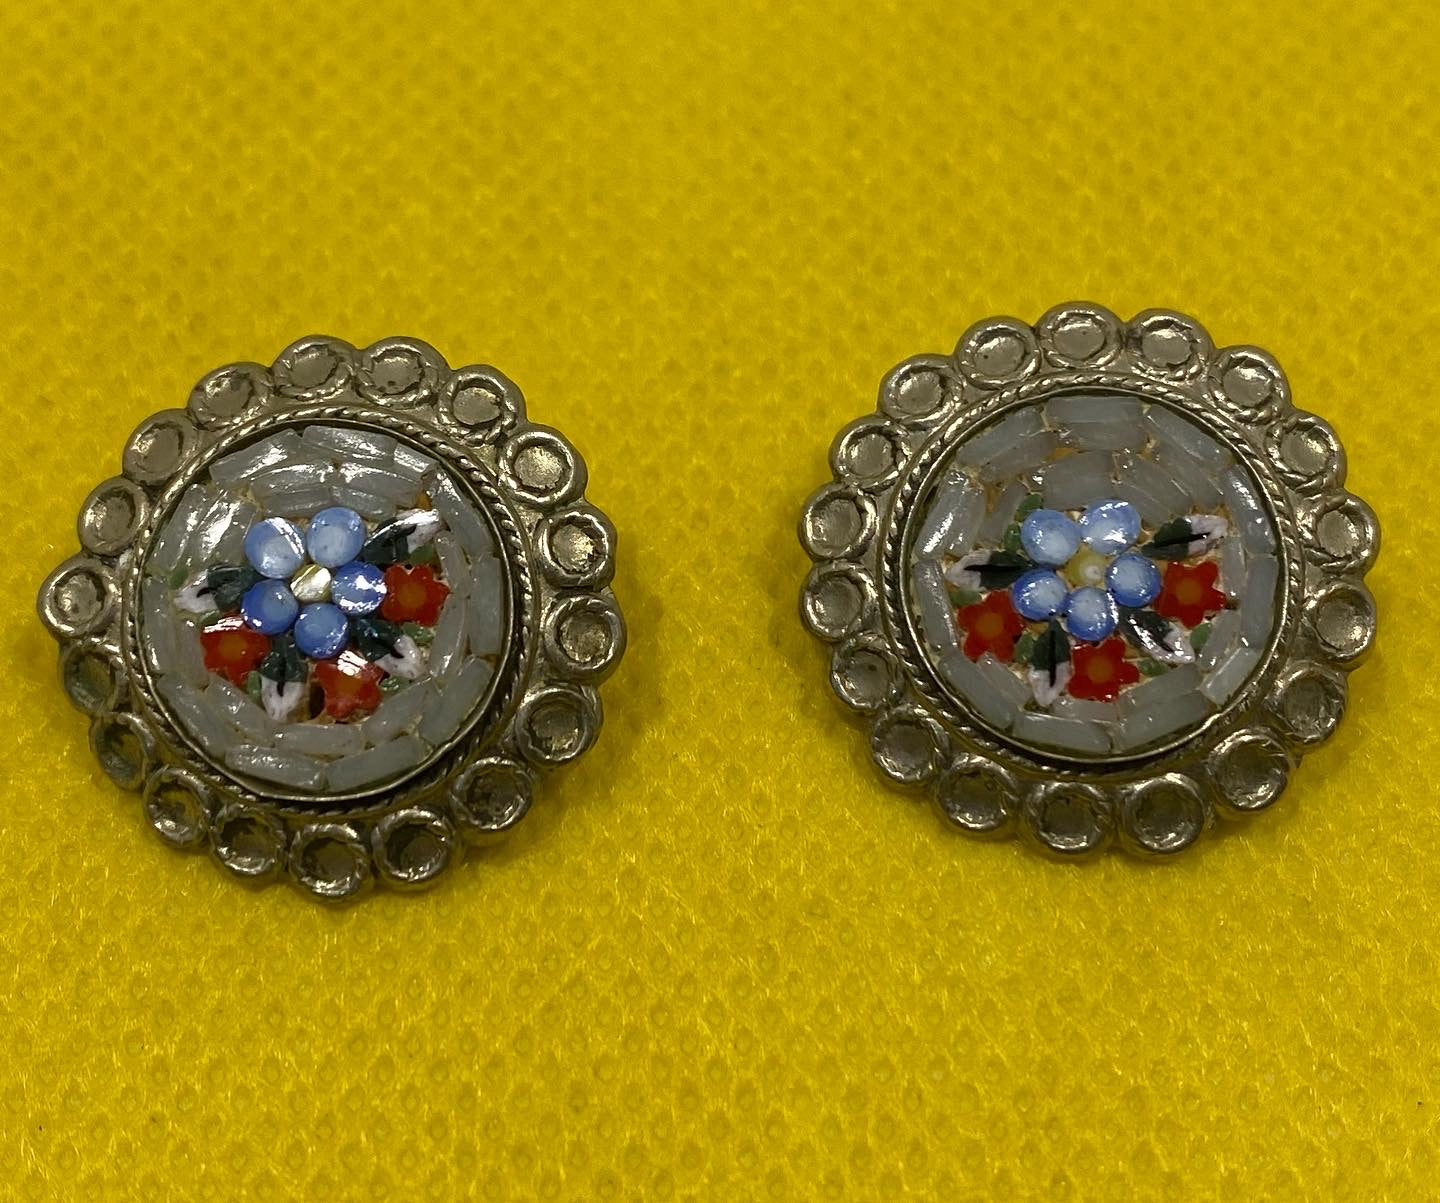 Beautiful pair of Italian vintage clip on Micromosaic earrings with a typical floral design.